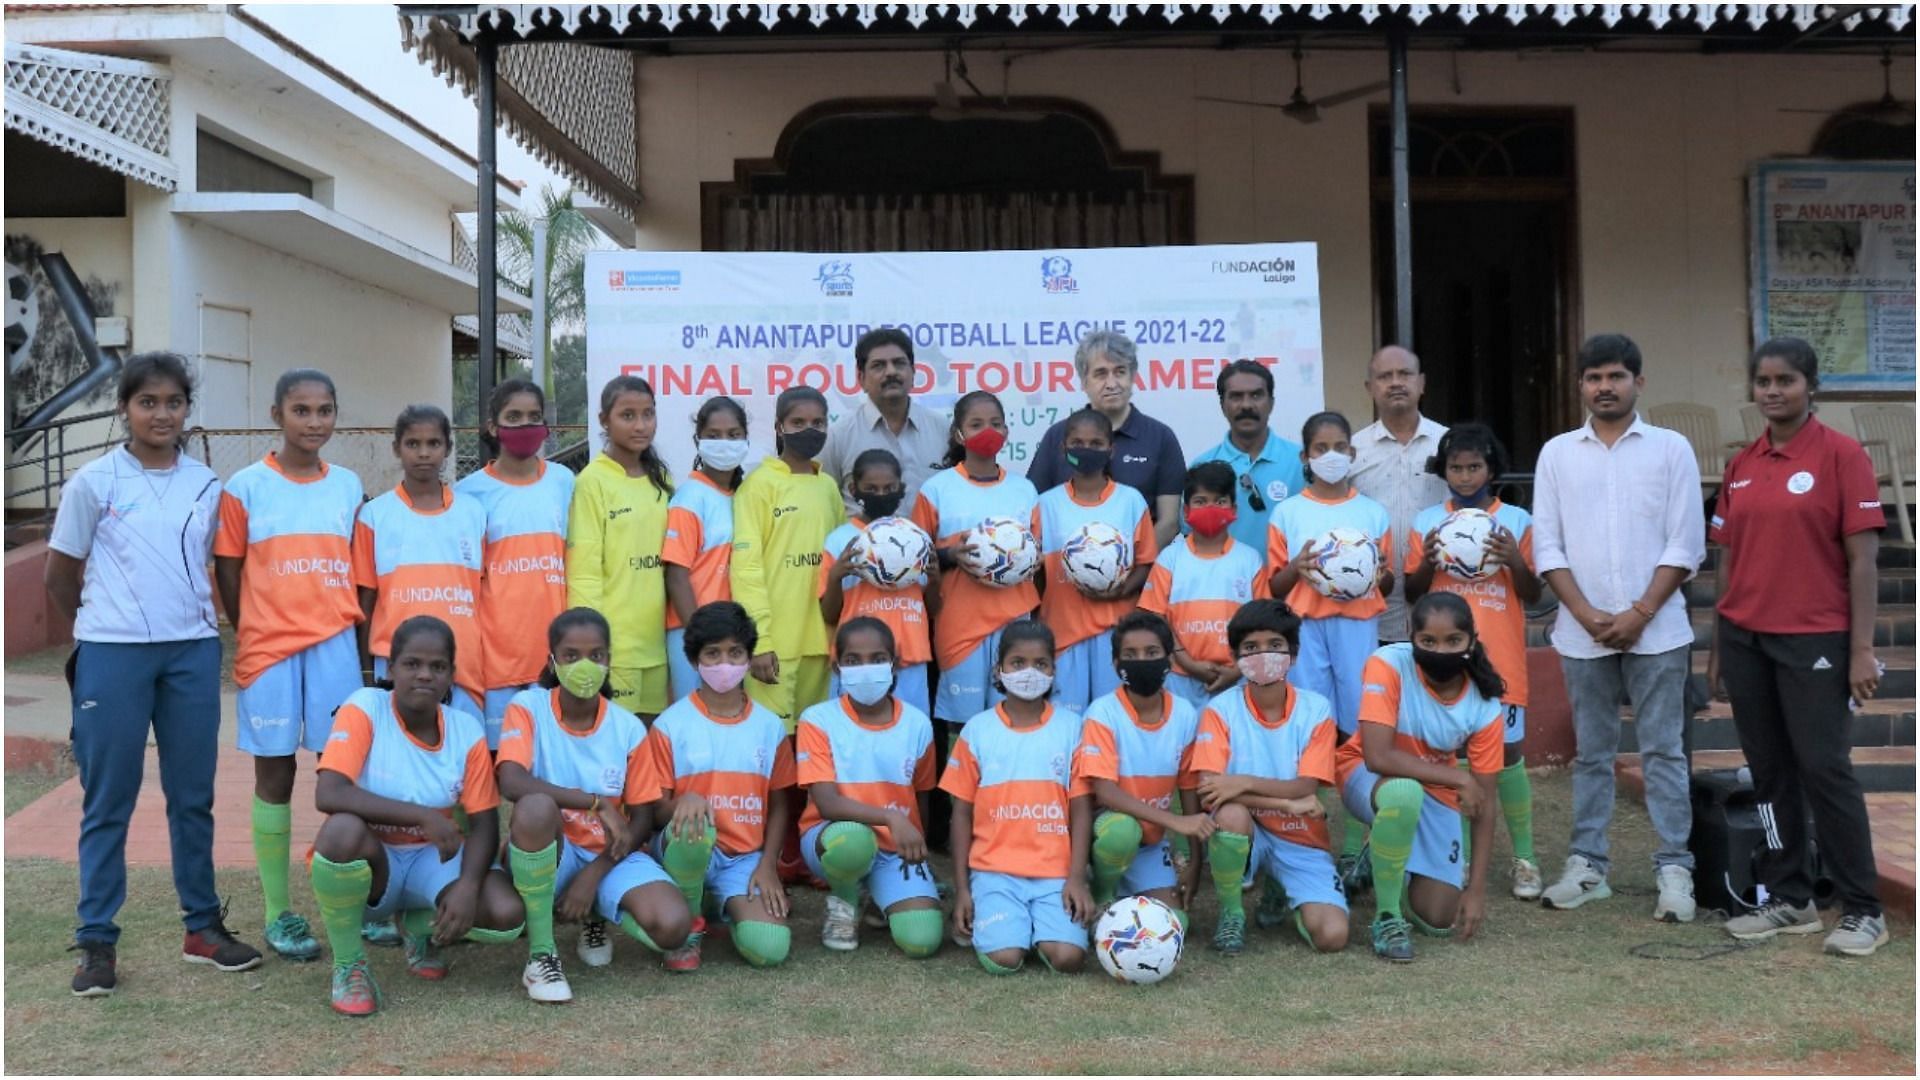 Finals of Anantapur Rural Football League kick off with support from LaLiga (Pic Credit: LaLiga Inda)